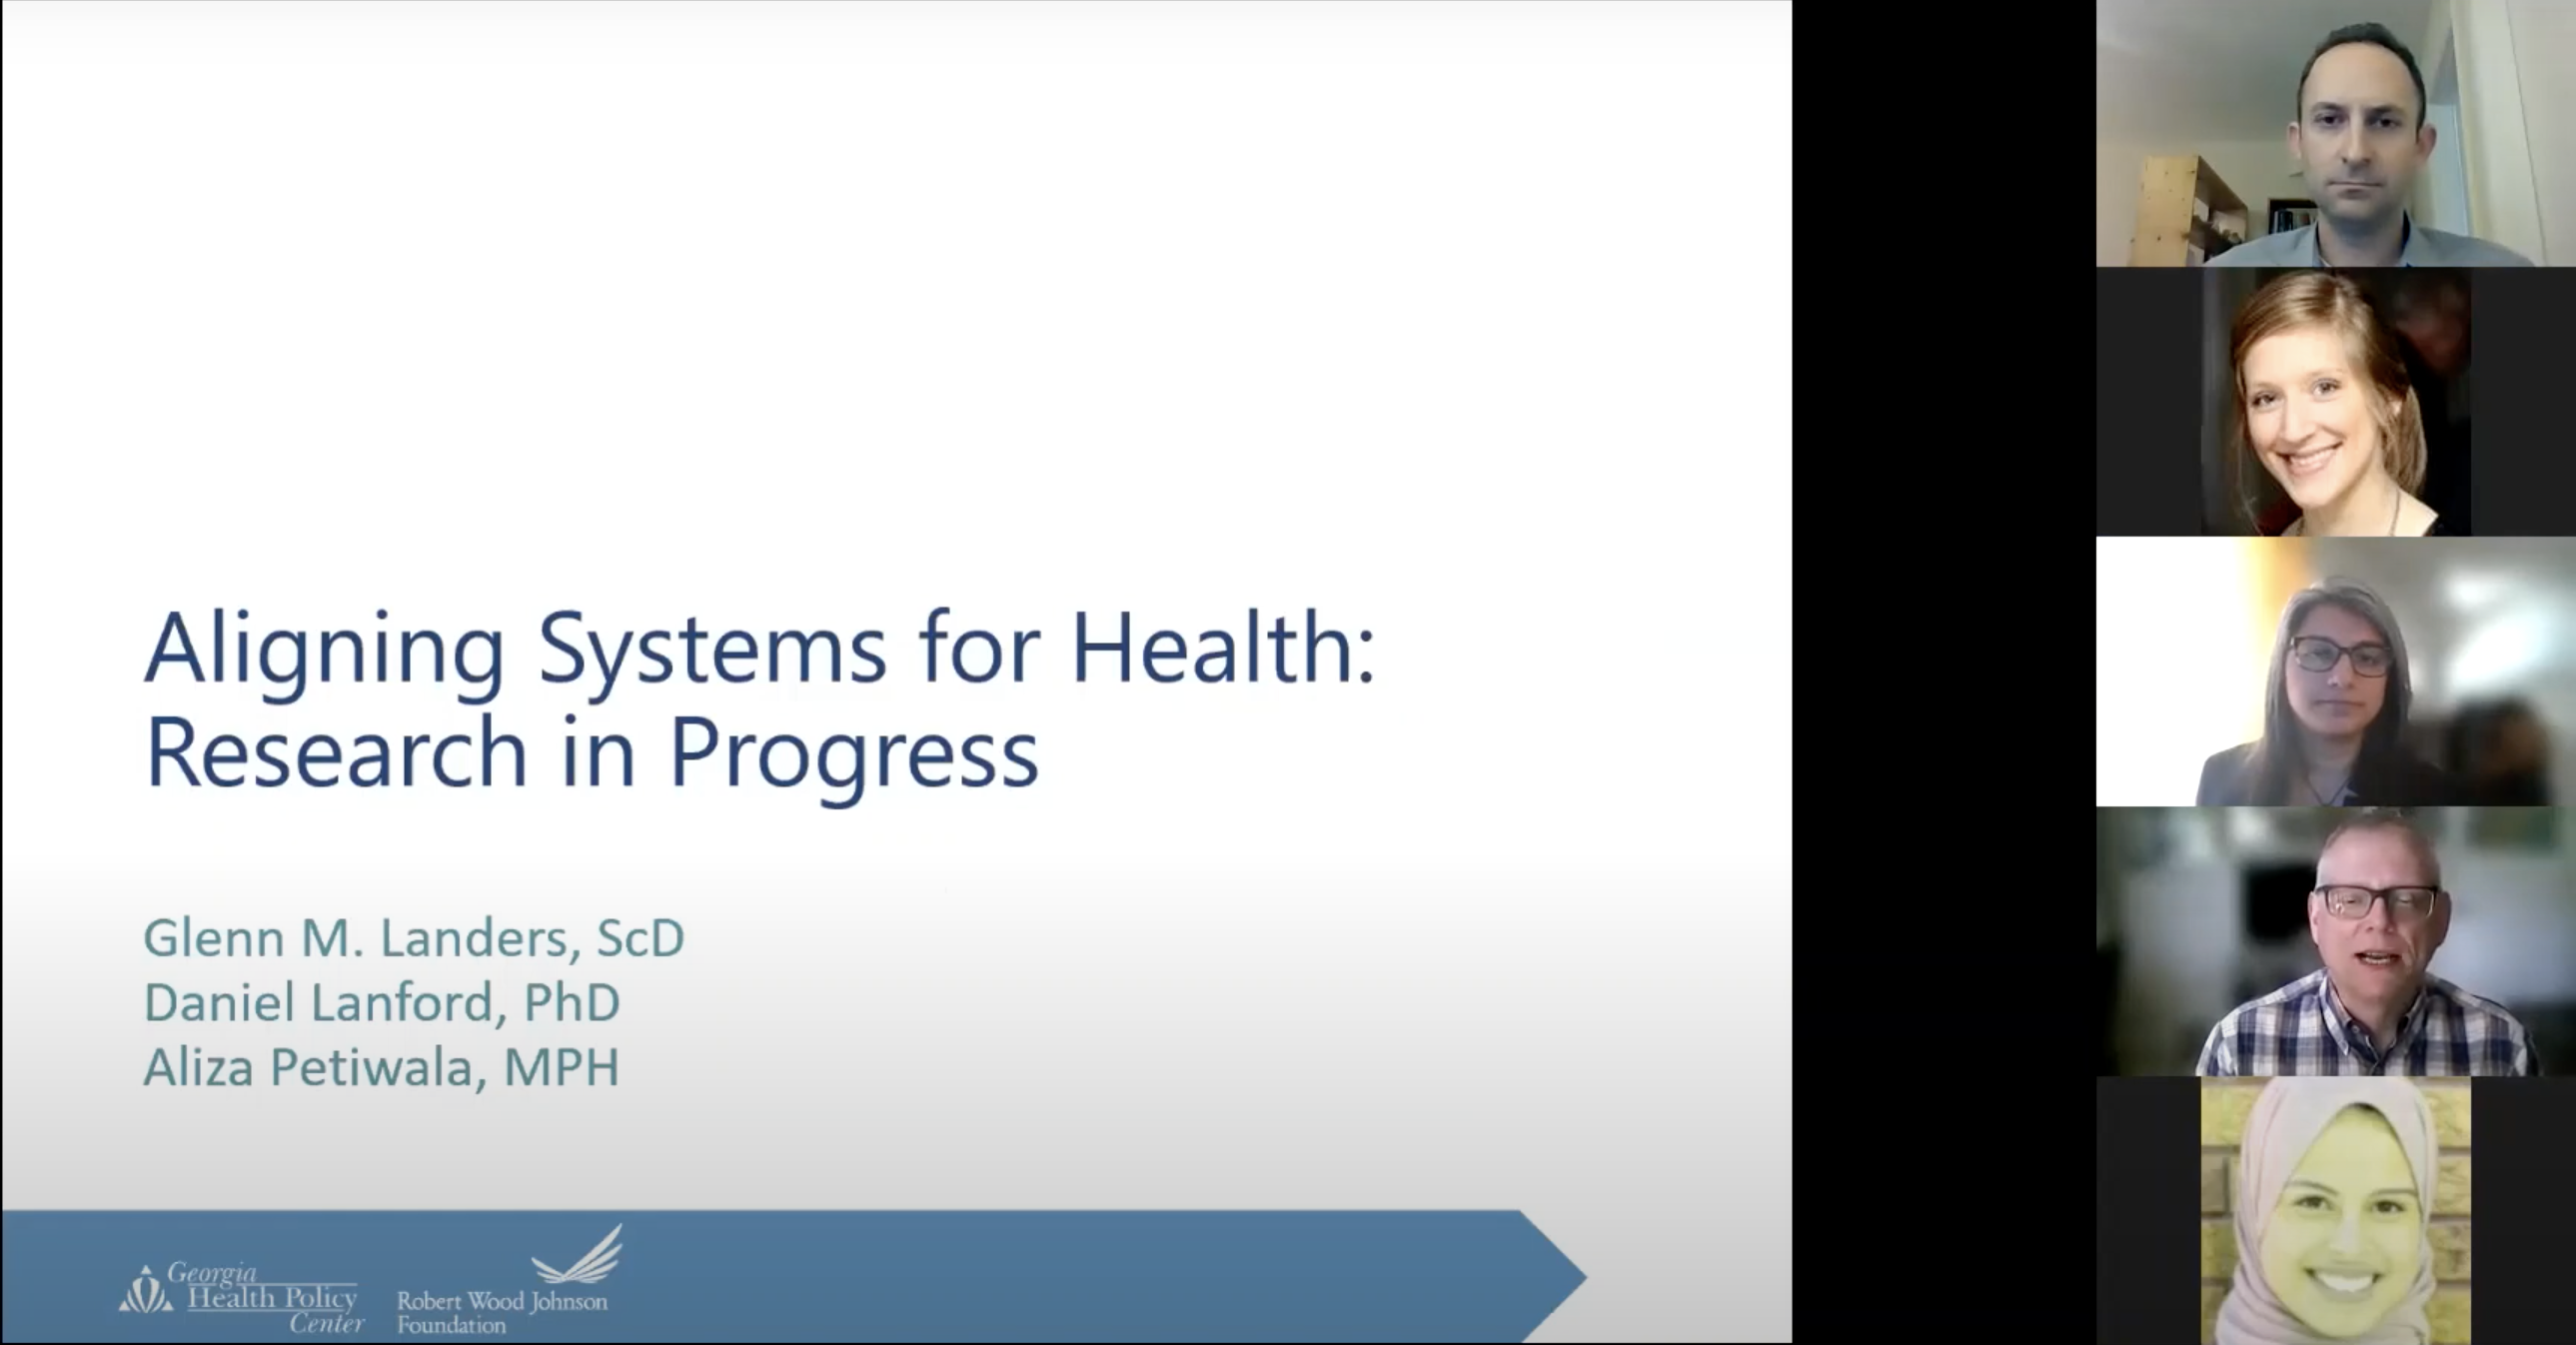 Addressing Systems for Health: Health Care, Public Health and Social Services